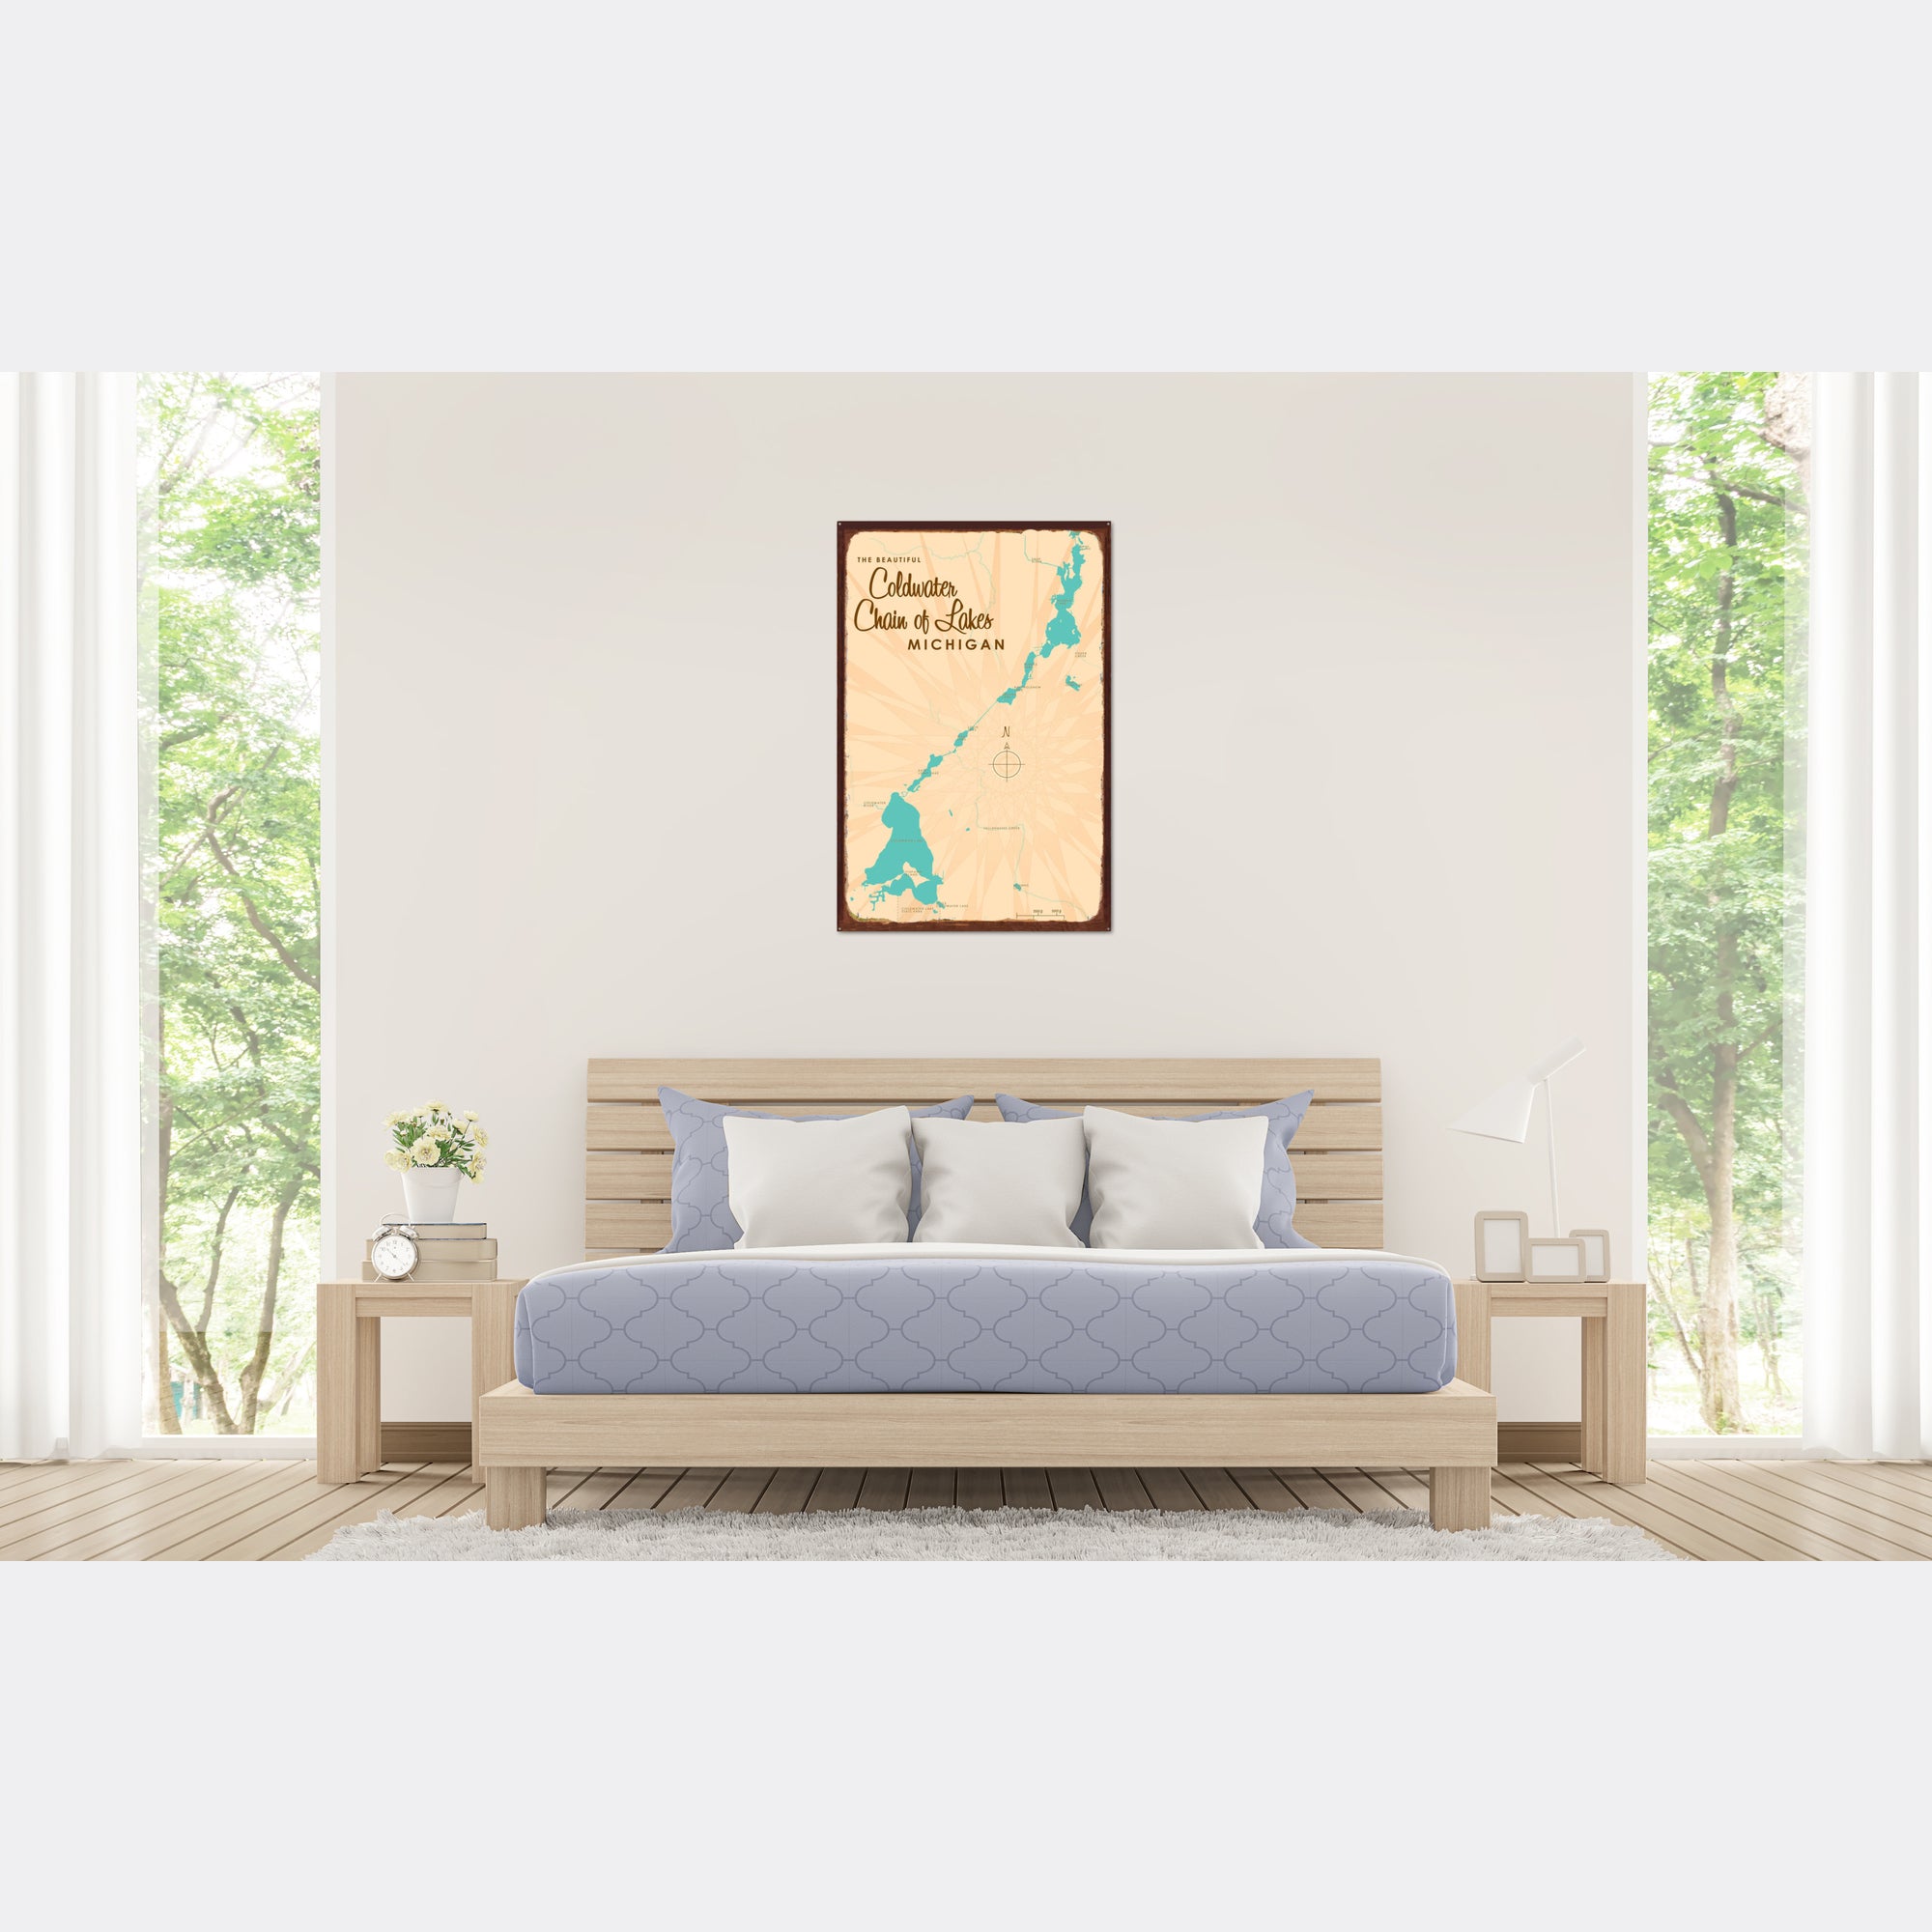 Coldwater Chain of Lakes Michigan, Rustic Metal Sign Map Art